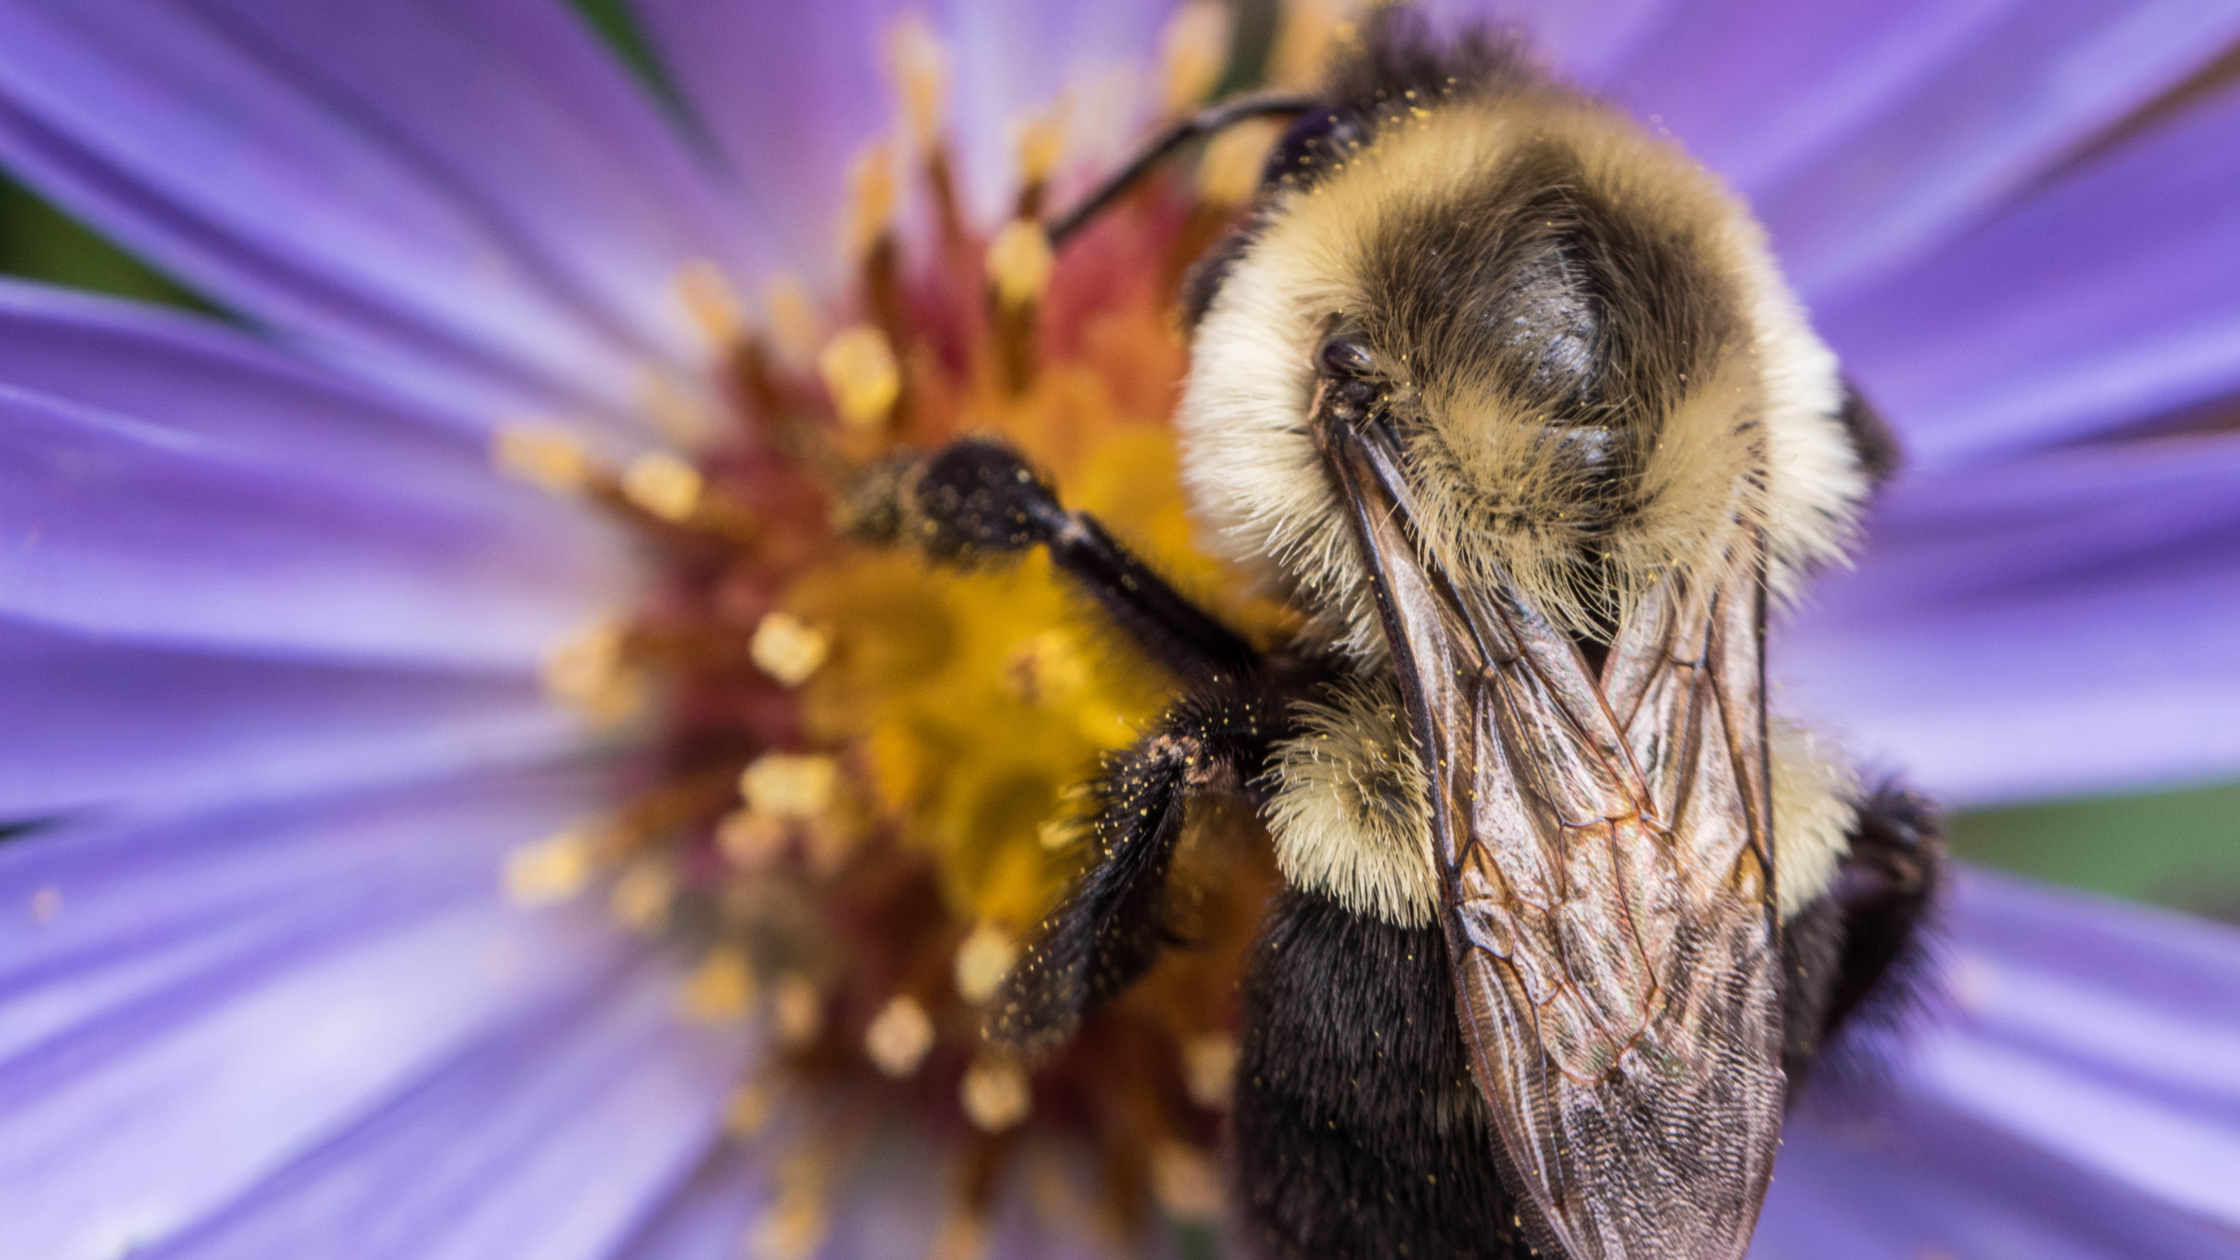 bumblebee on aster